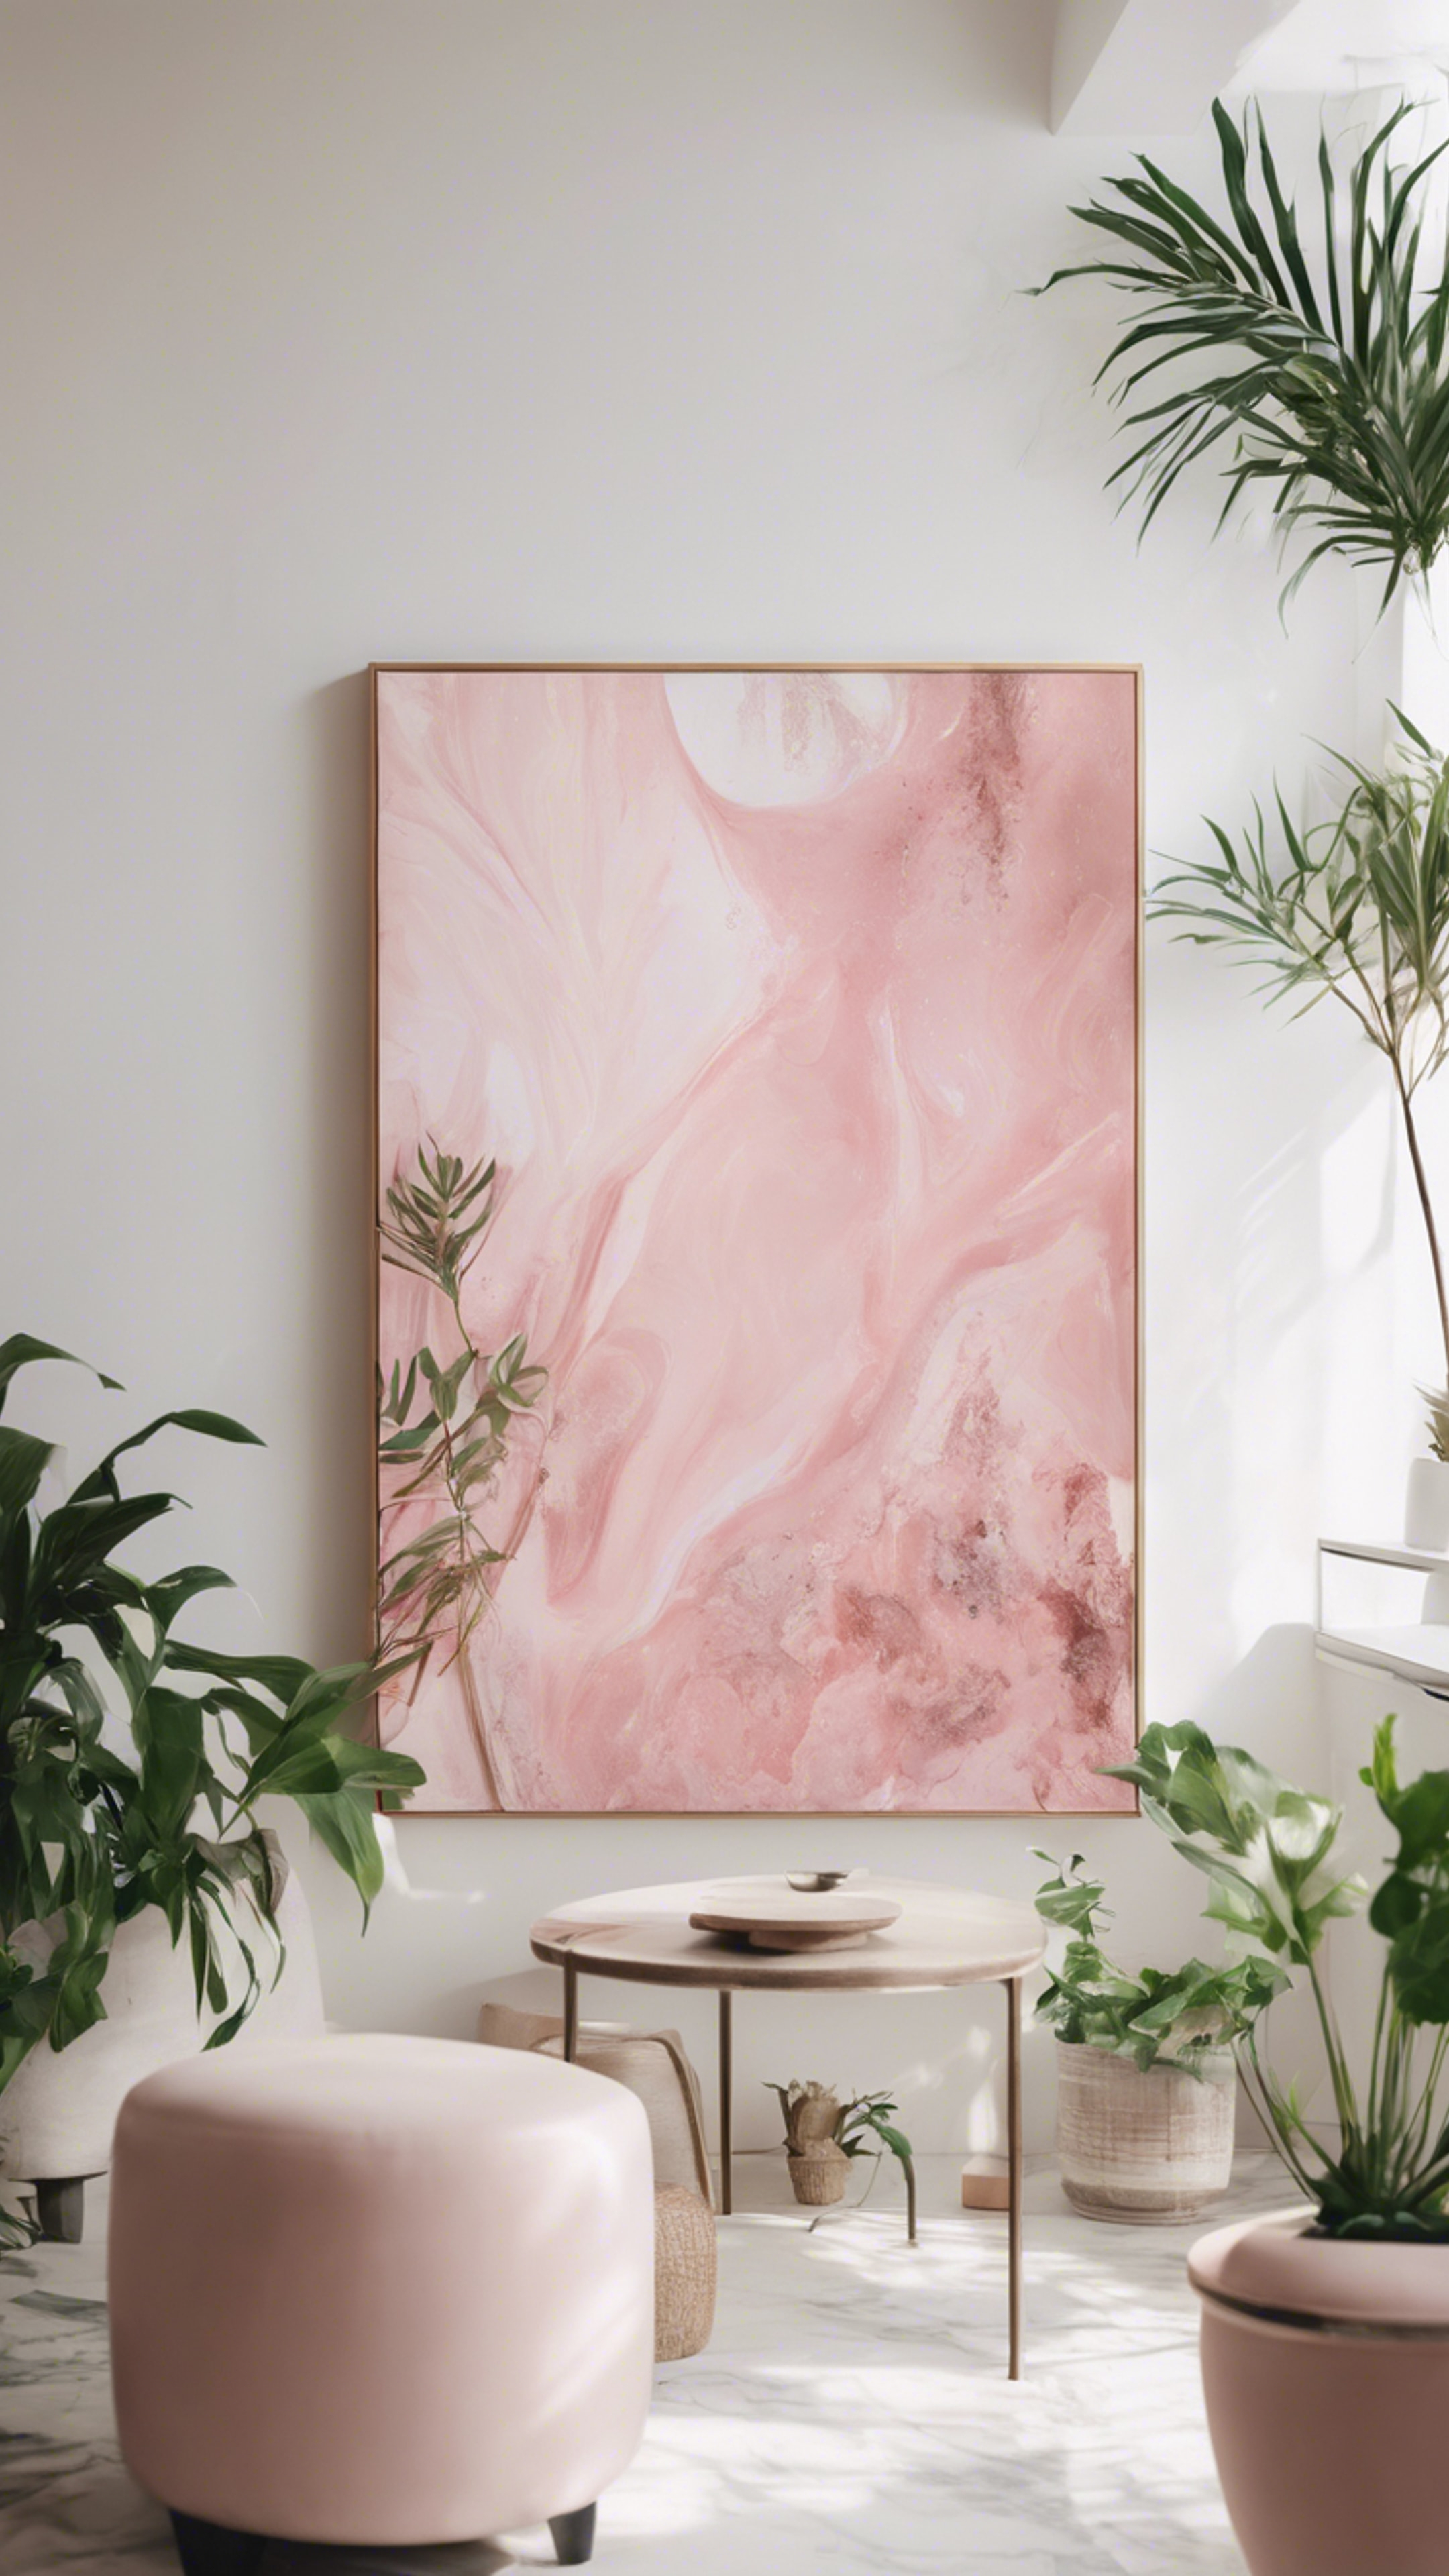 A soft pink abstract painting on a white wall surrounded by indoor plants, enhancing the aesthetic of the room Тапет[9fa4f1f3650f4fbb9955]